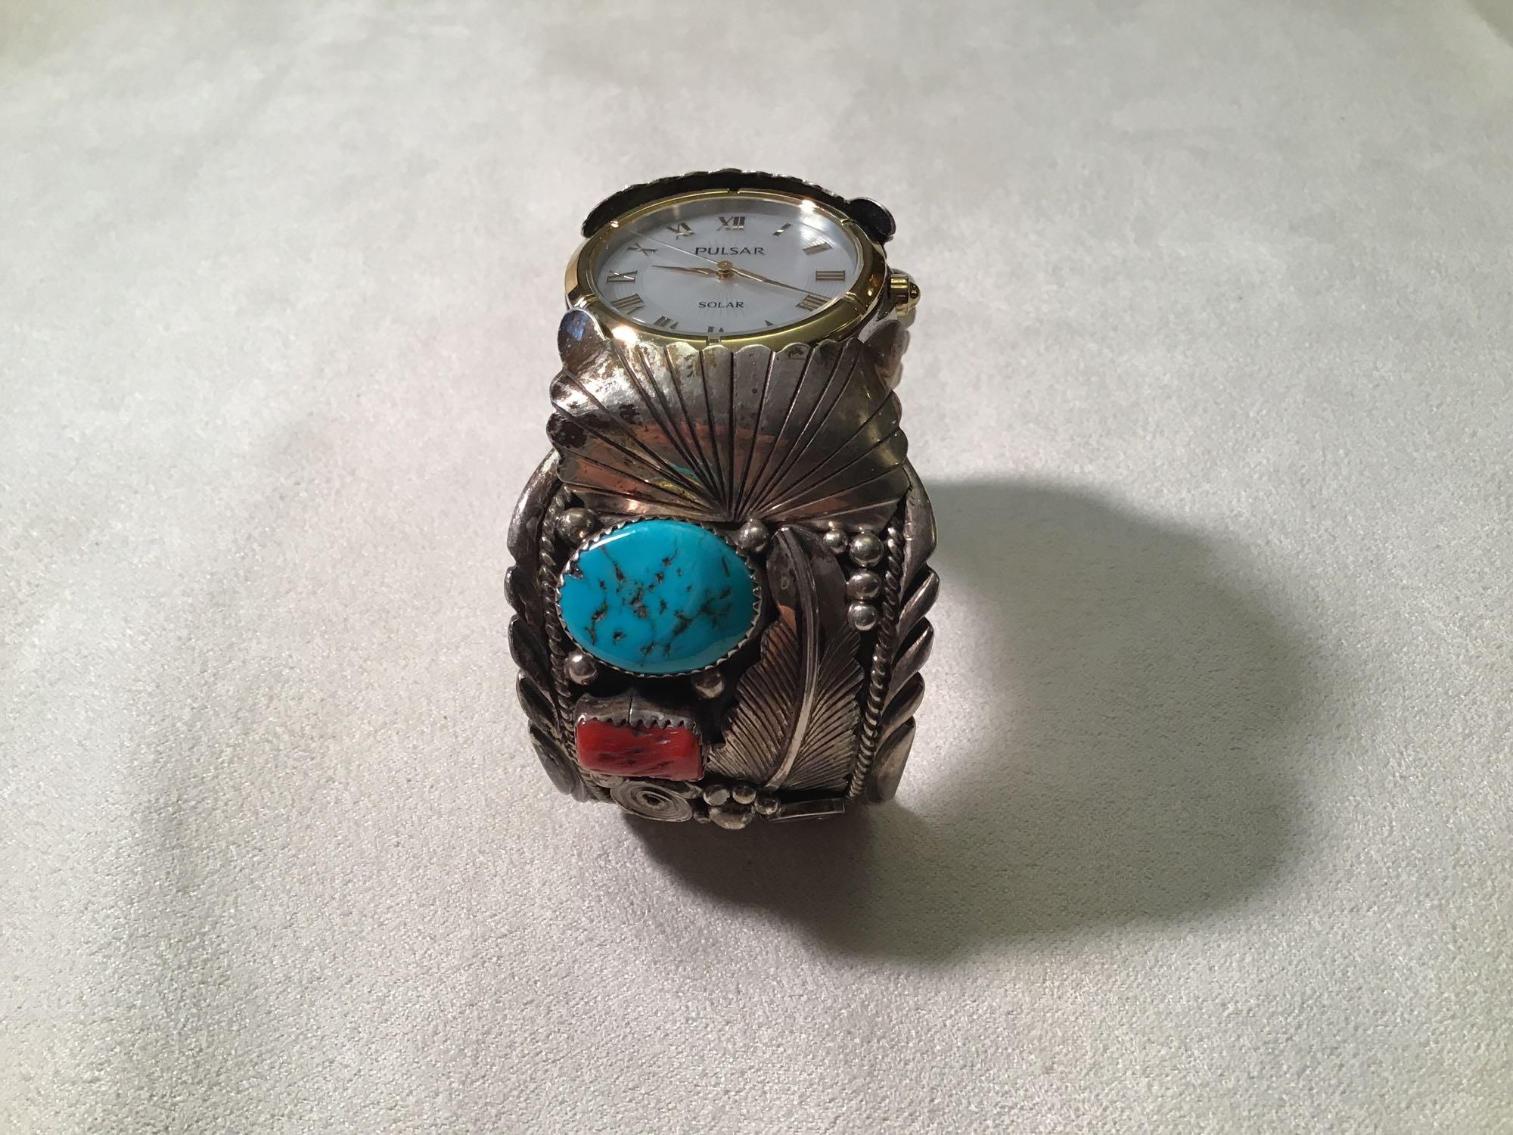 Image for Vintage Native American Style Watches